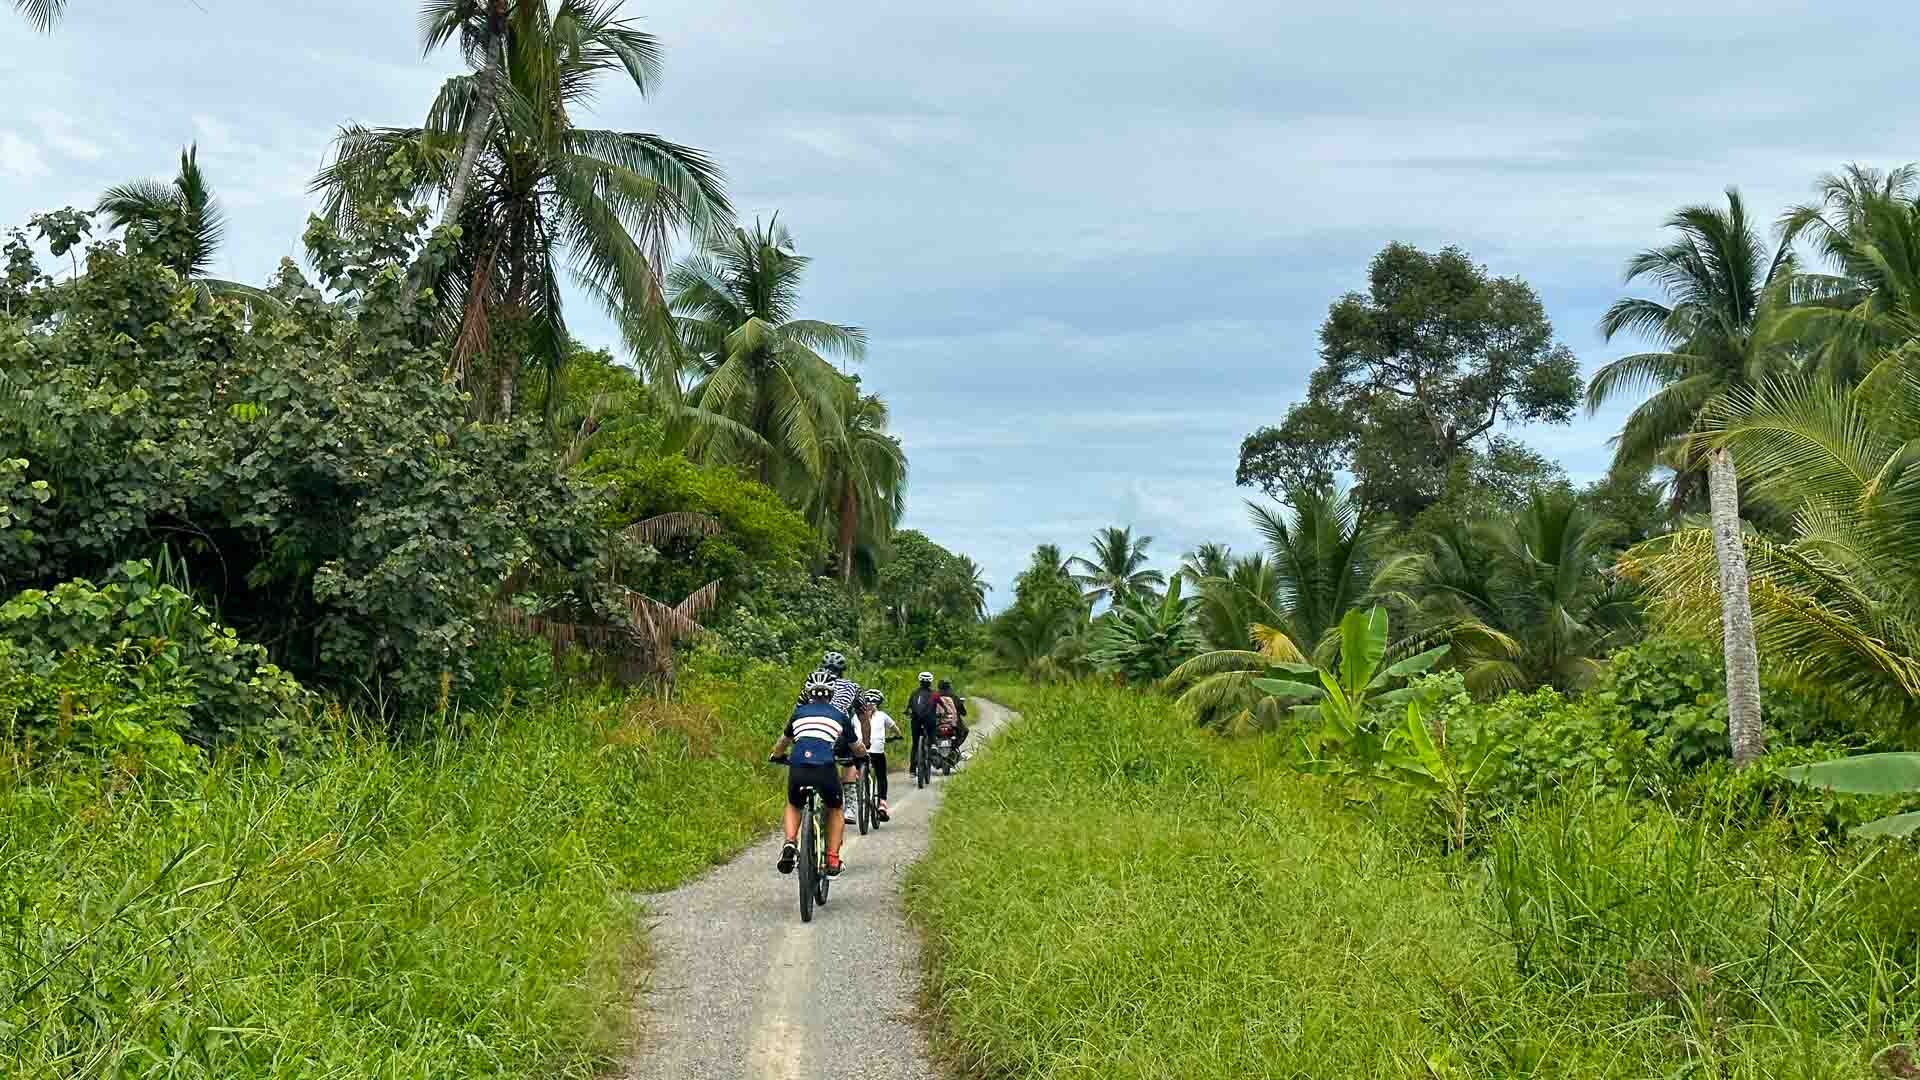 Group of cyclists on a cycling path in Borneo with grass and trees on either side